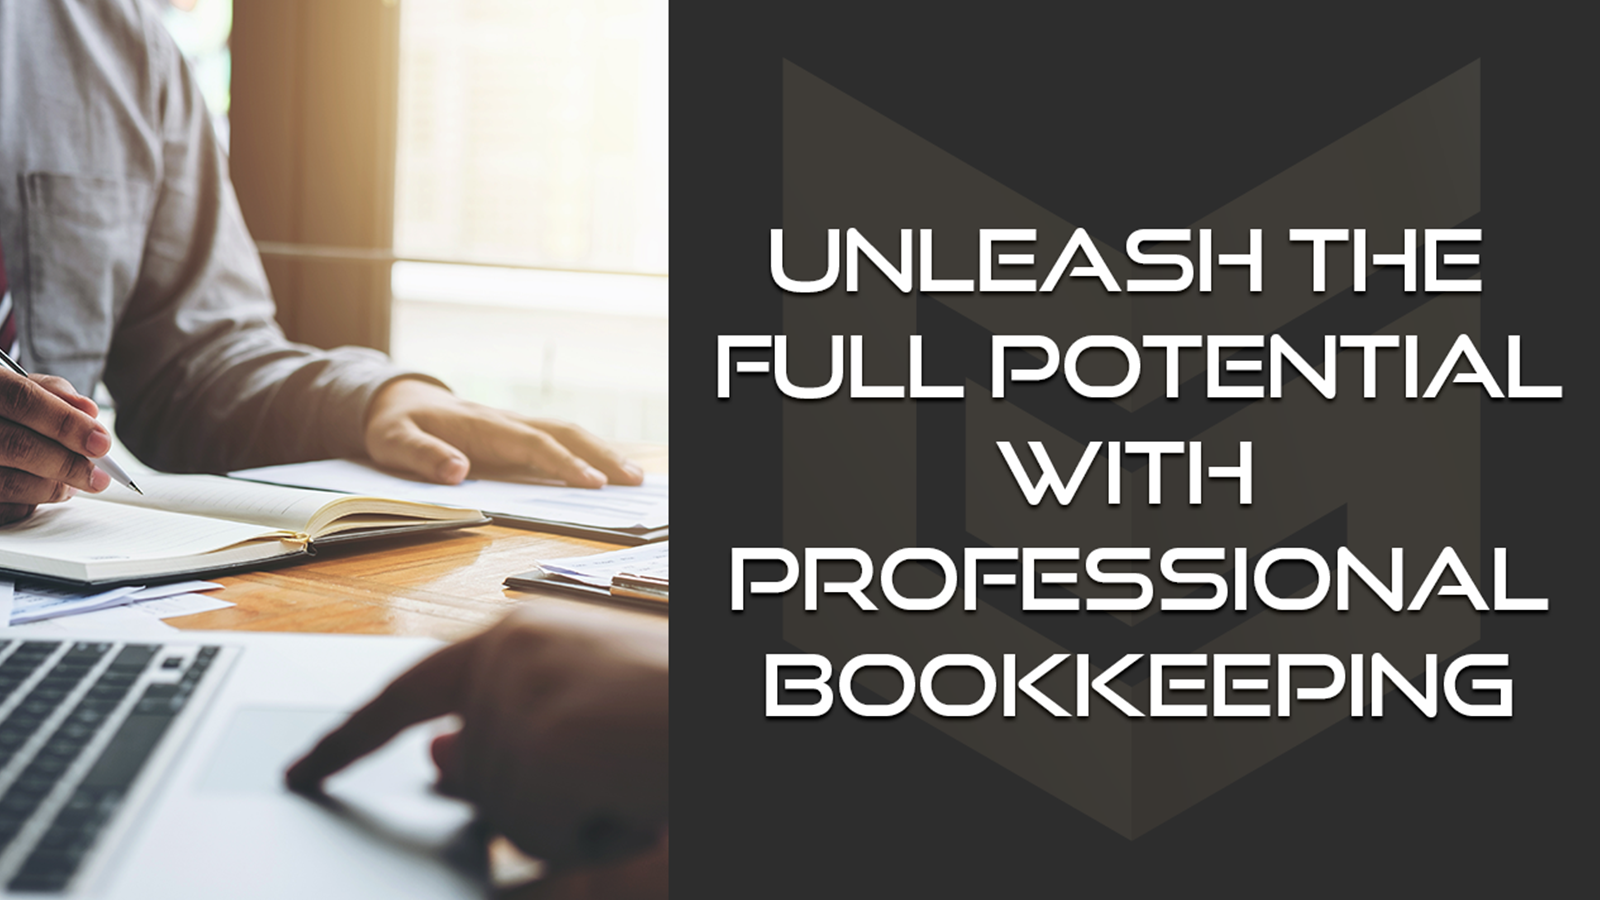 Image with the text Unleash the Full Potential with Professional Bookkeeping